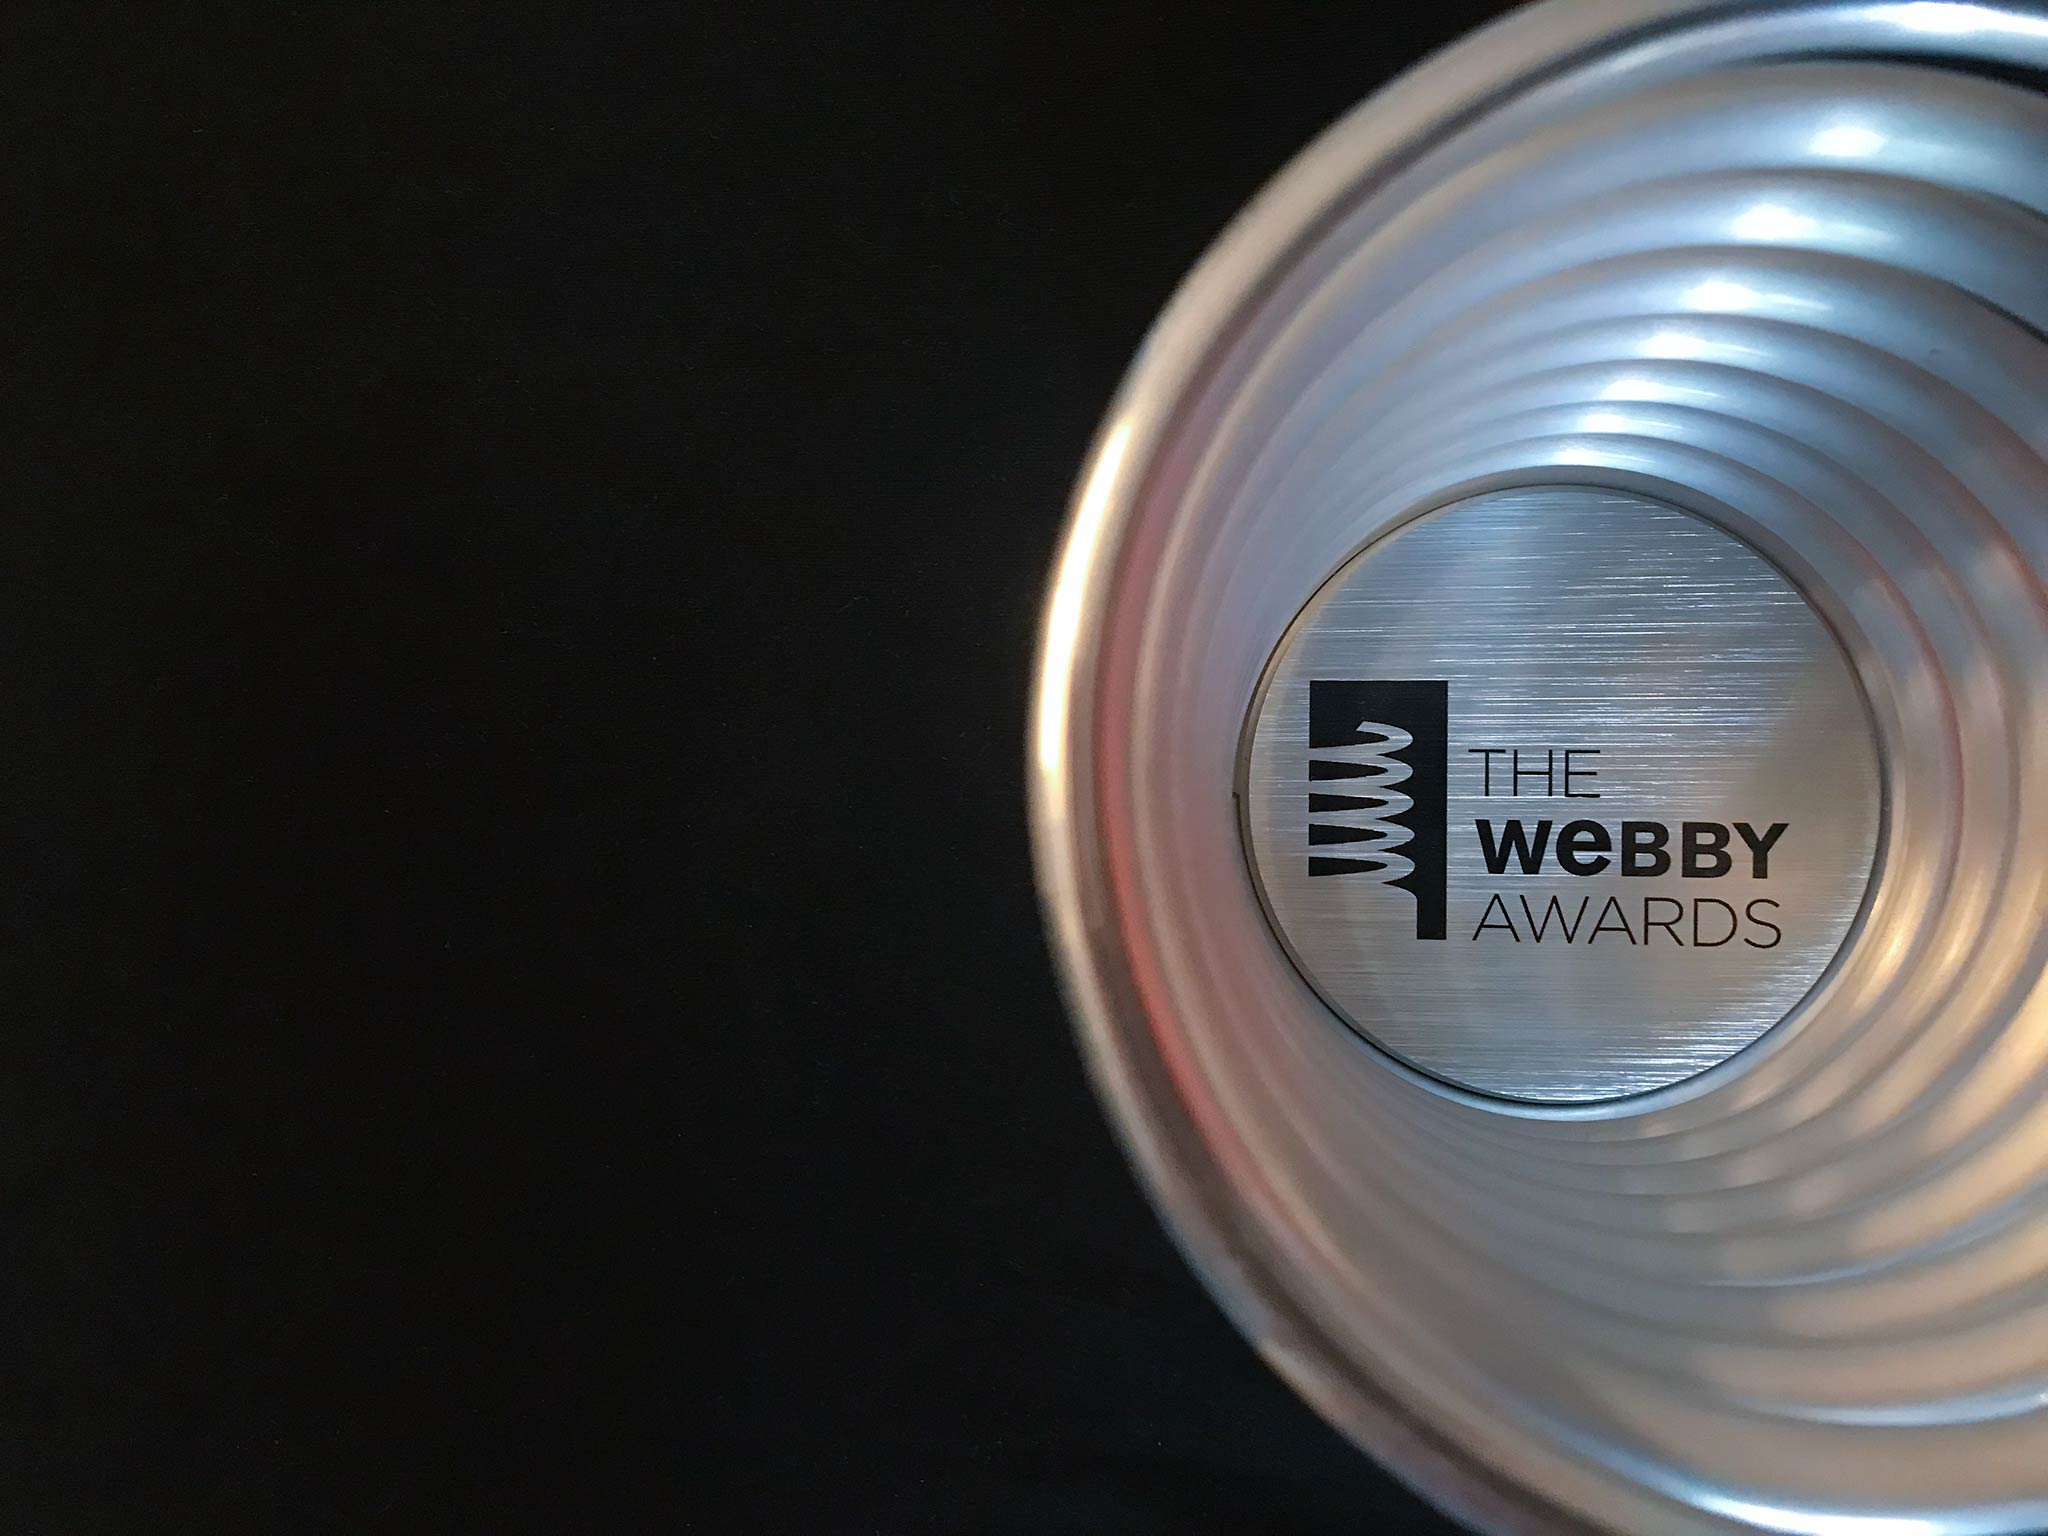 What If Named the Best Science & Education Video Series at the 24th Annual Webby Awards